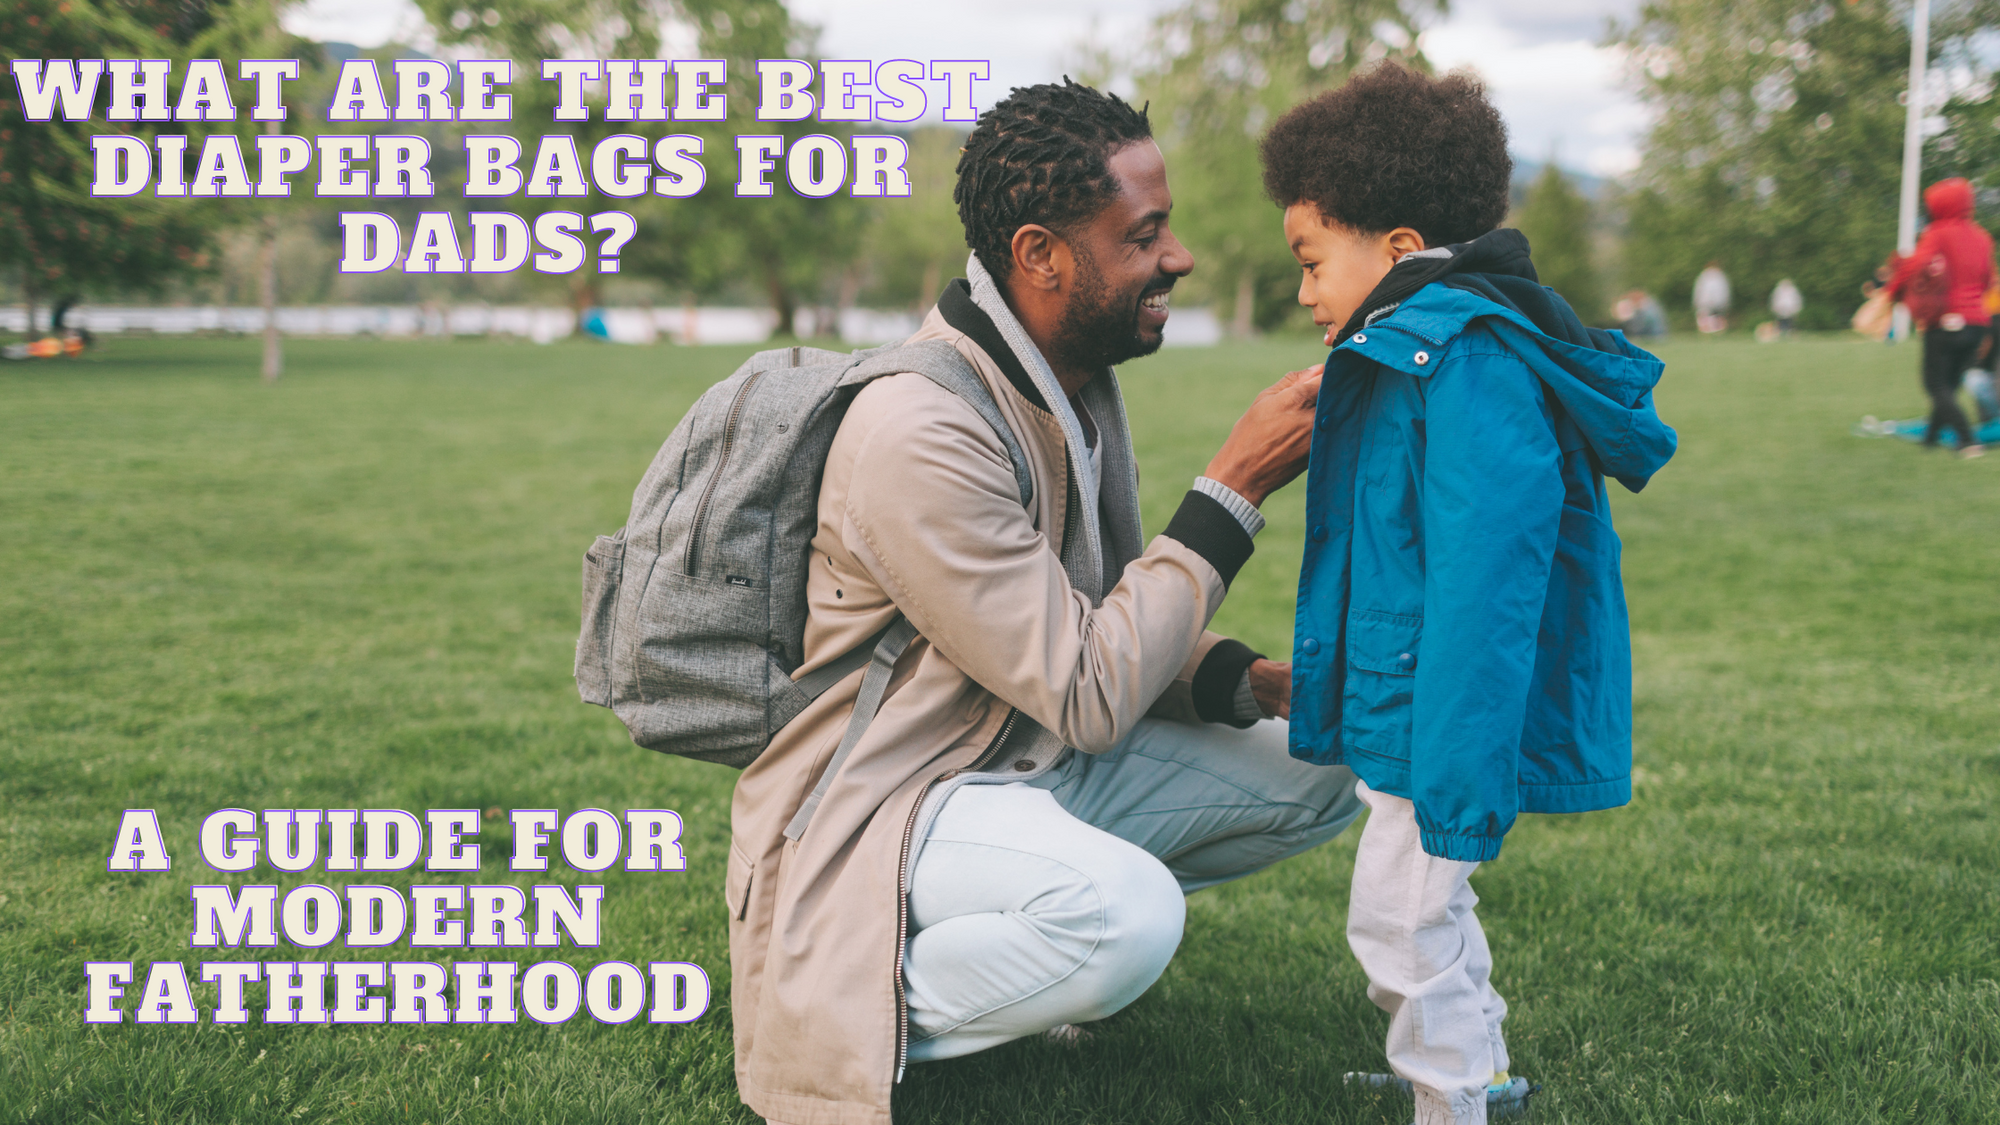 What Are the Best Diaper Bags for Dads? A Guide for Modern Fatherhood